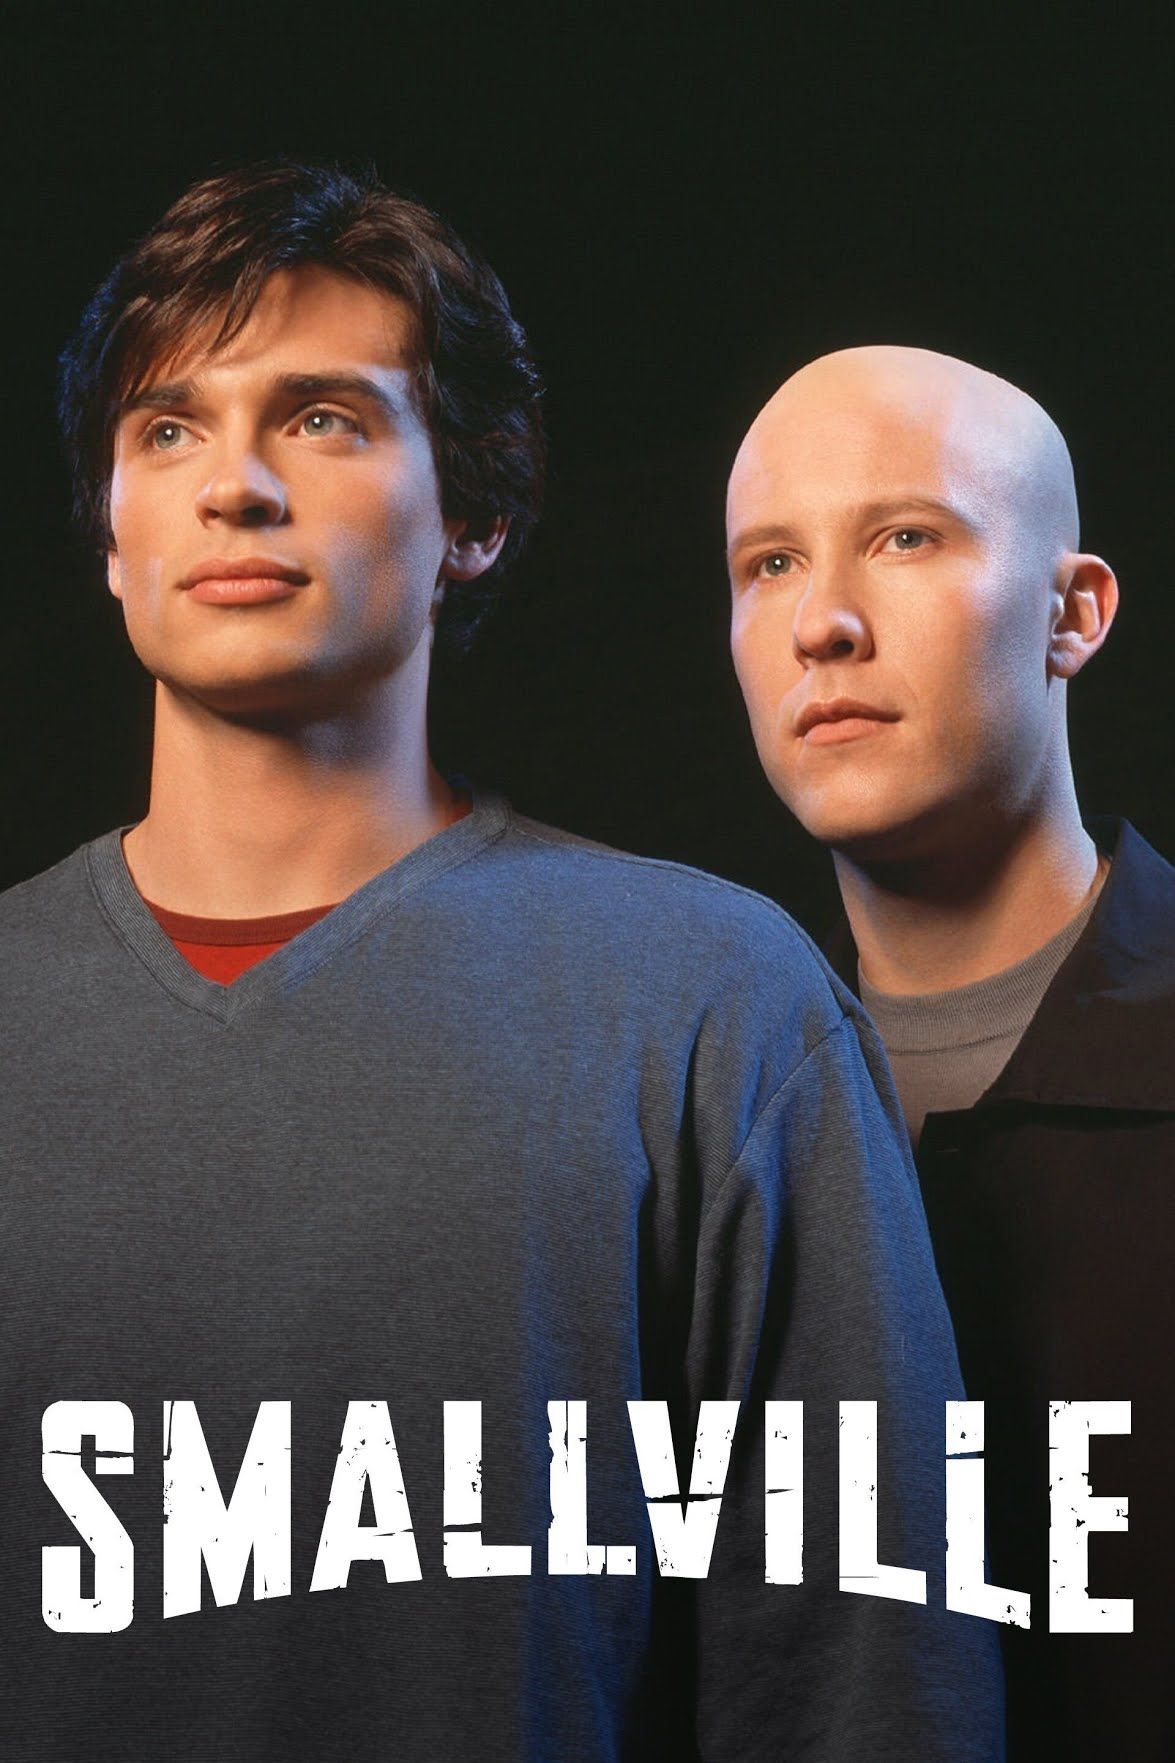 Smallville official poster